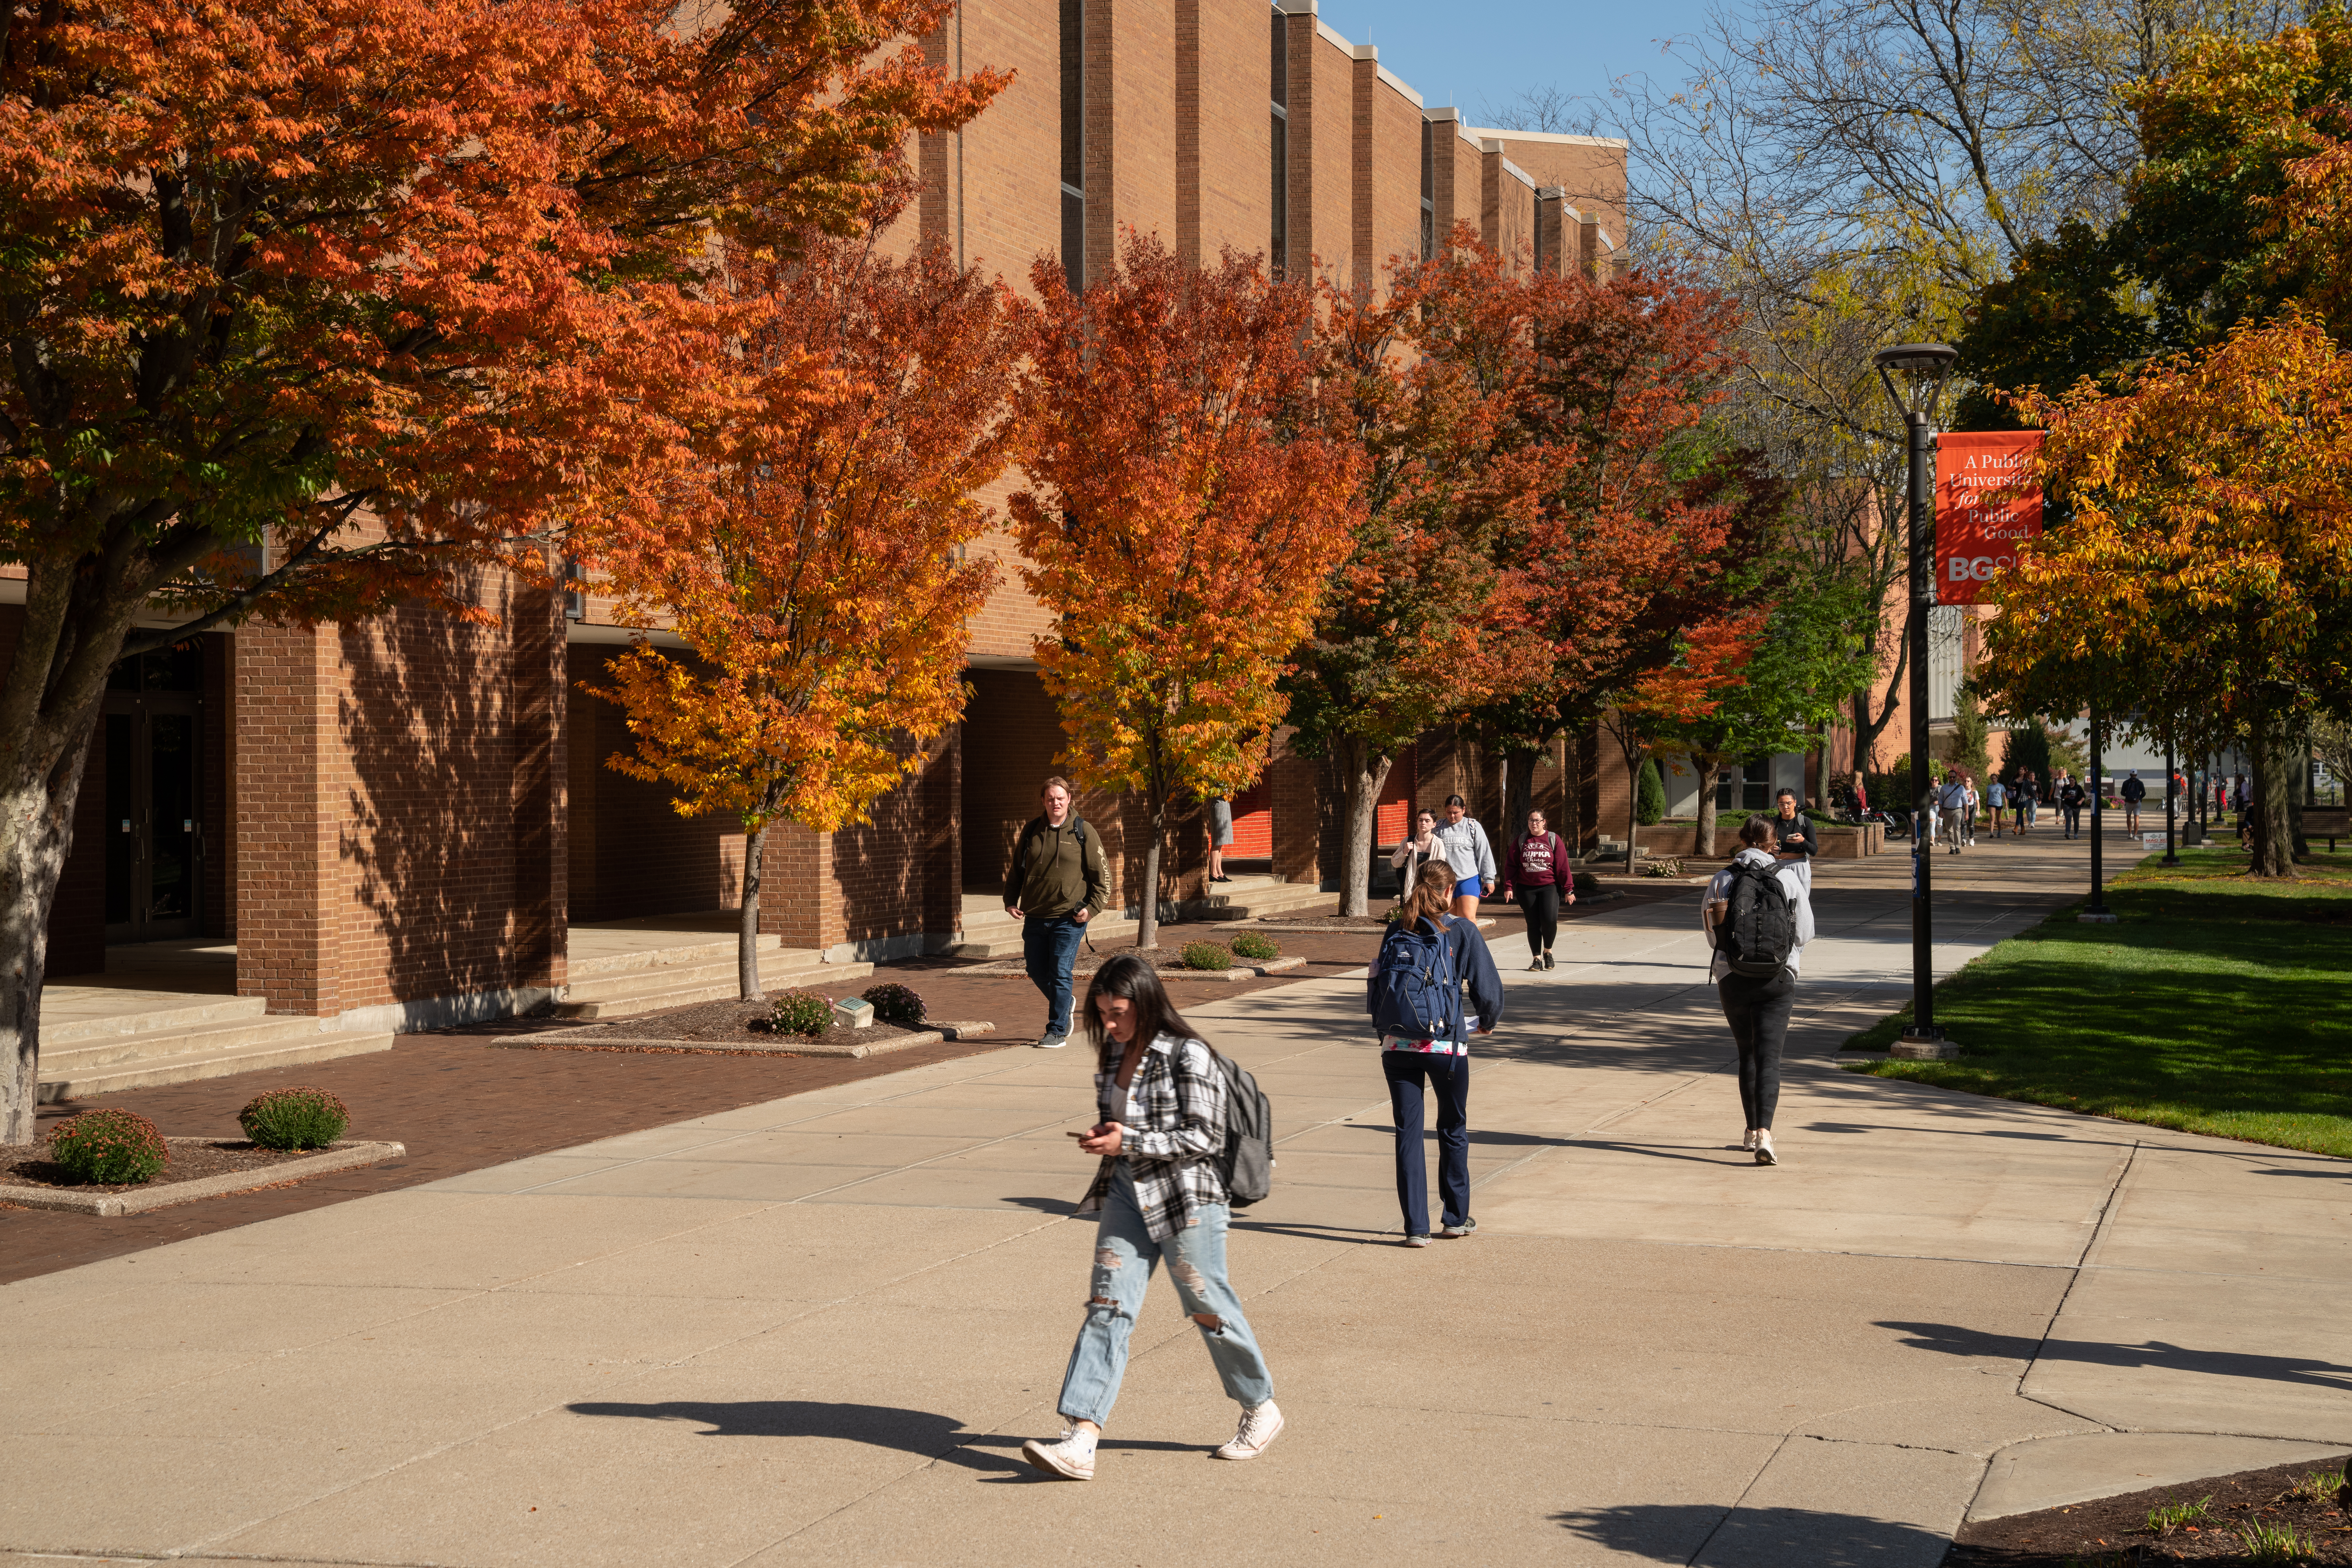 Students walk on campus in autumn with trees showing orange and yellow leaves